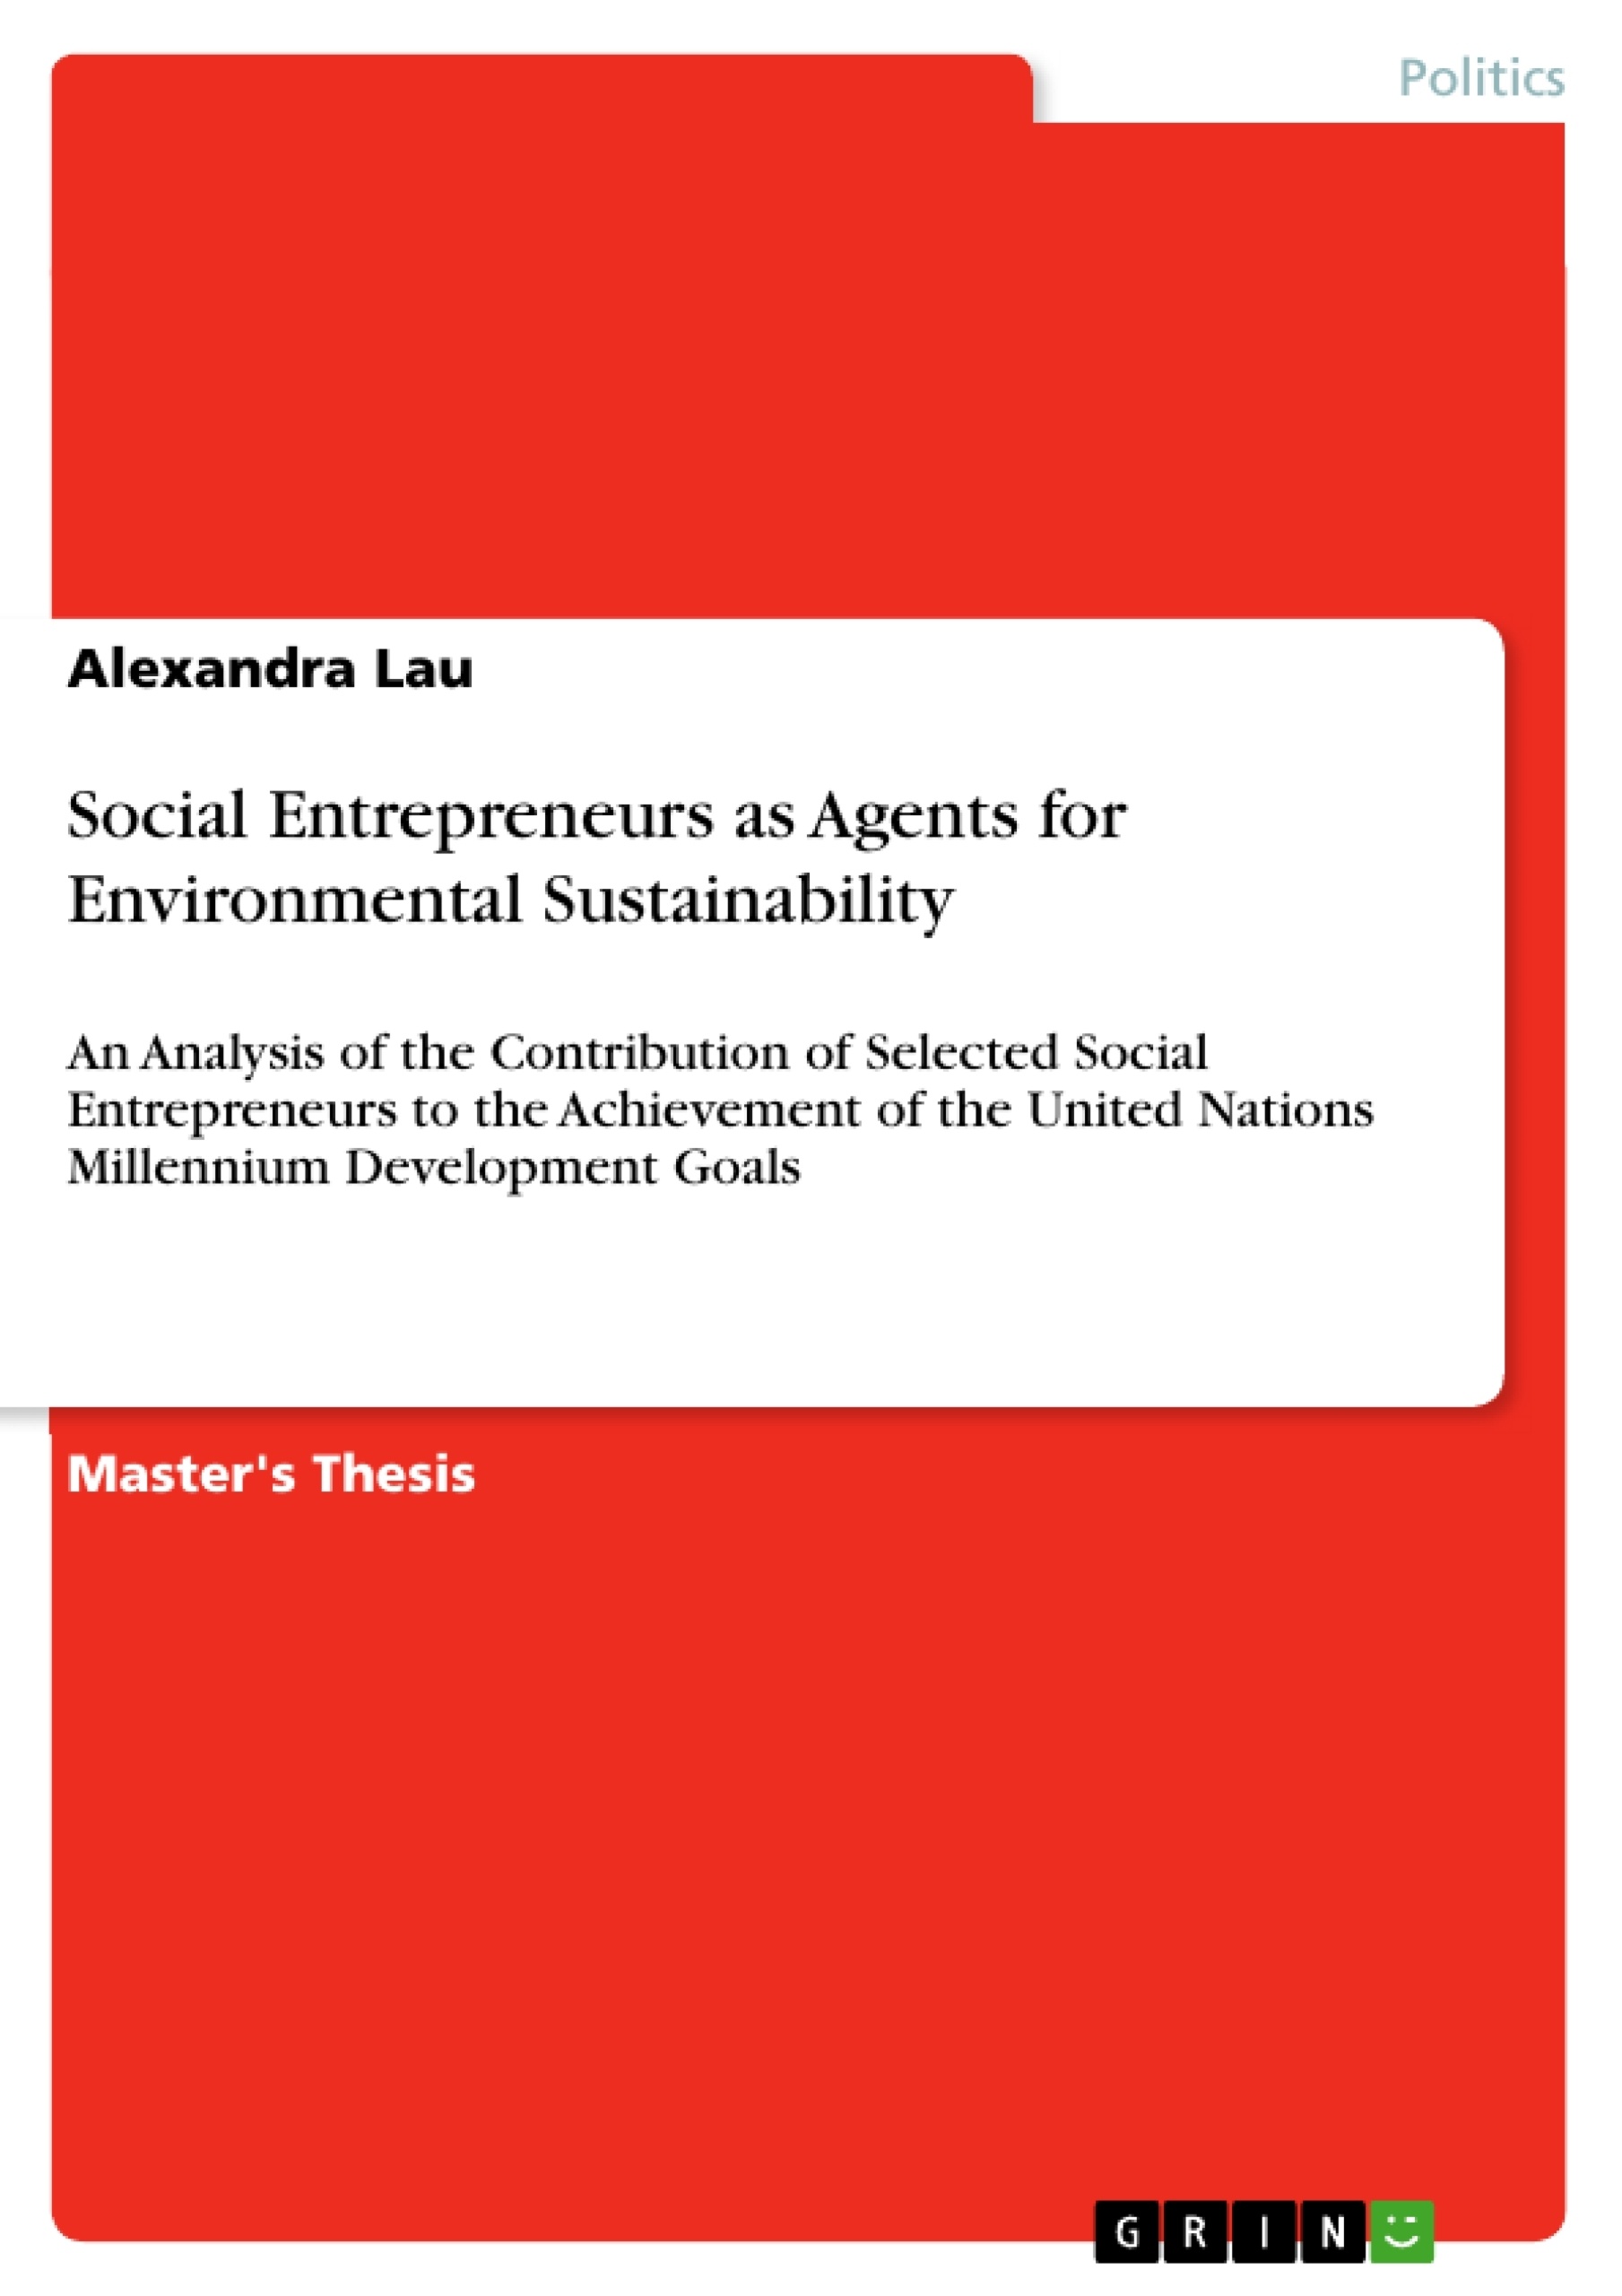 Title: Social Entrepreneurs as Agents for Environmental Sustainability